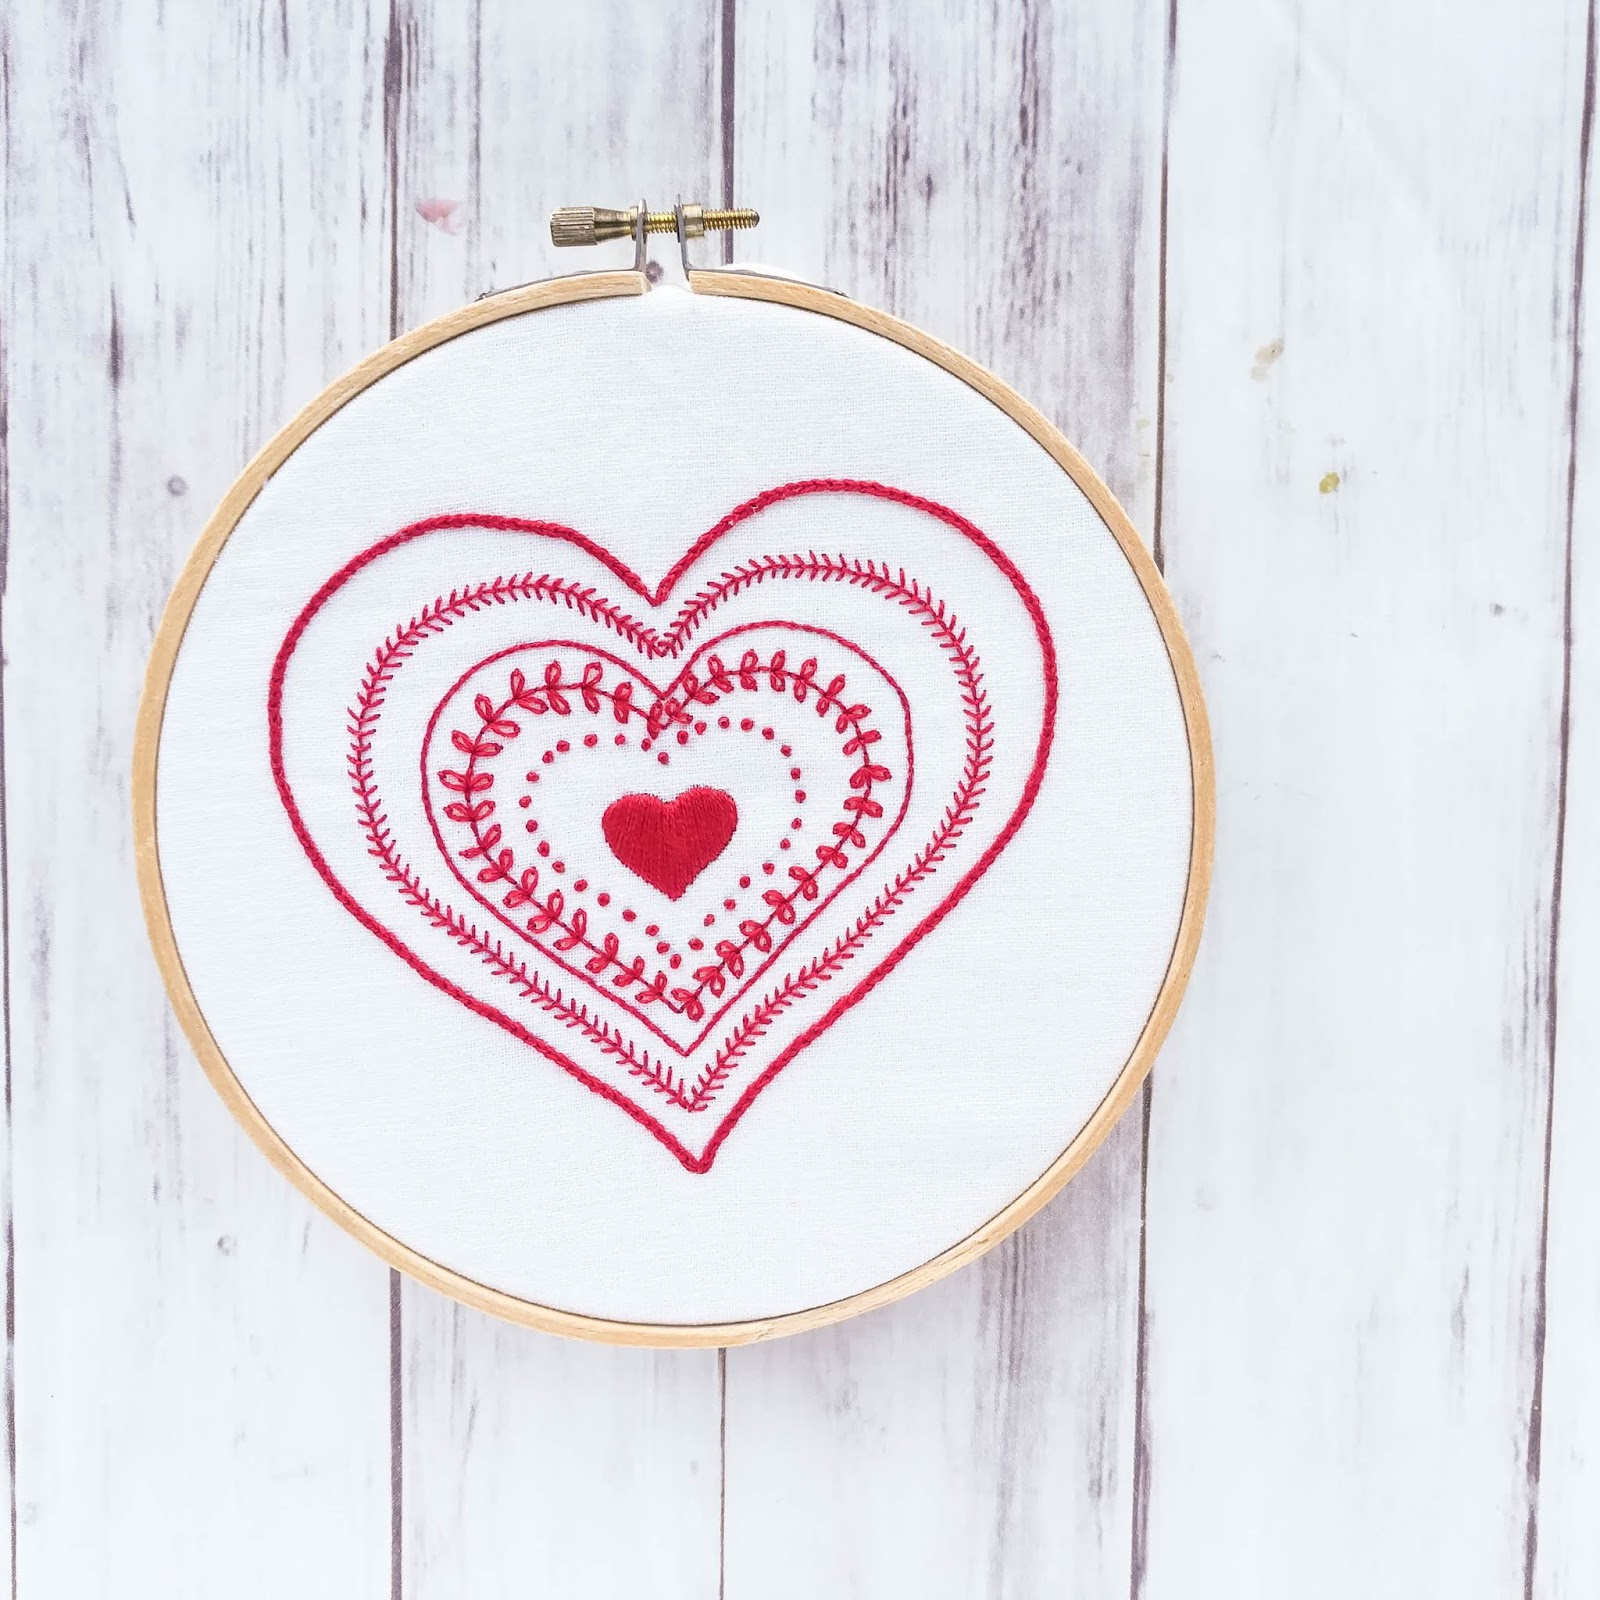 Scandinavian Embroidery Patterns Free A Lively Hope A Lively Hope Stitching Club Hygge Heart